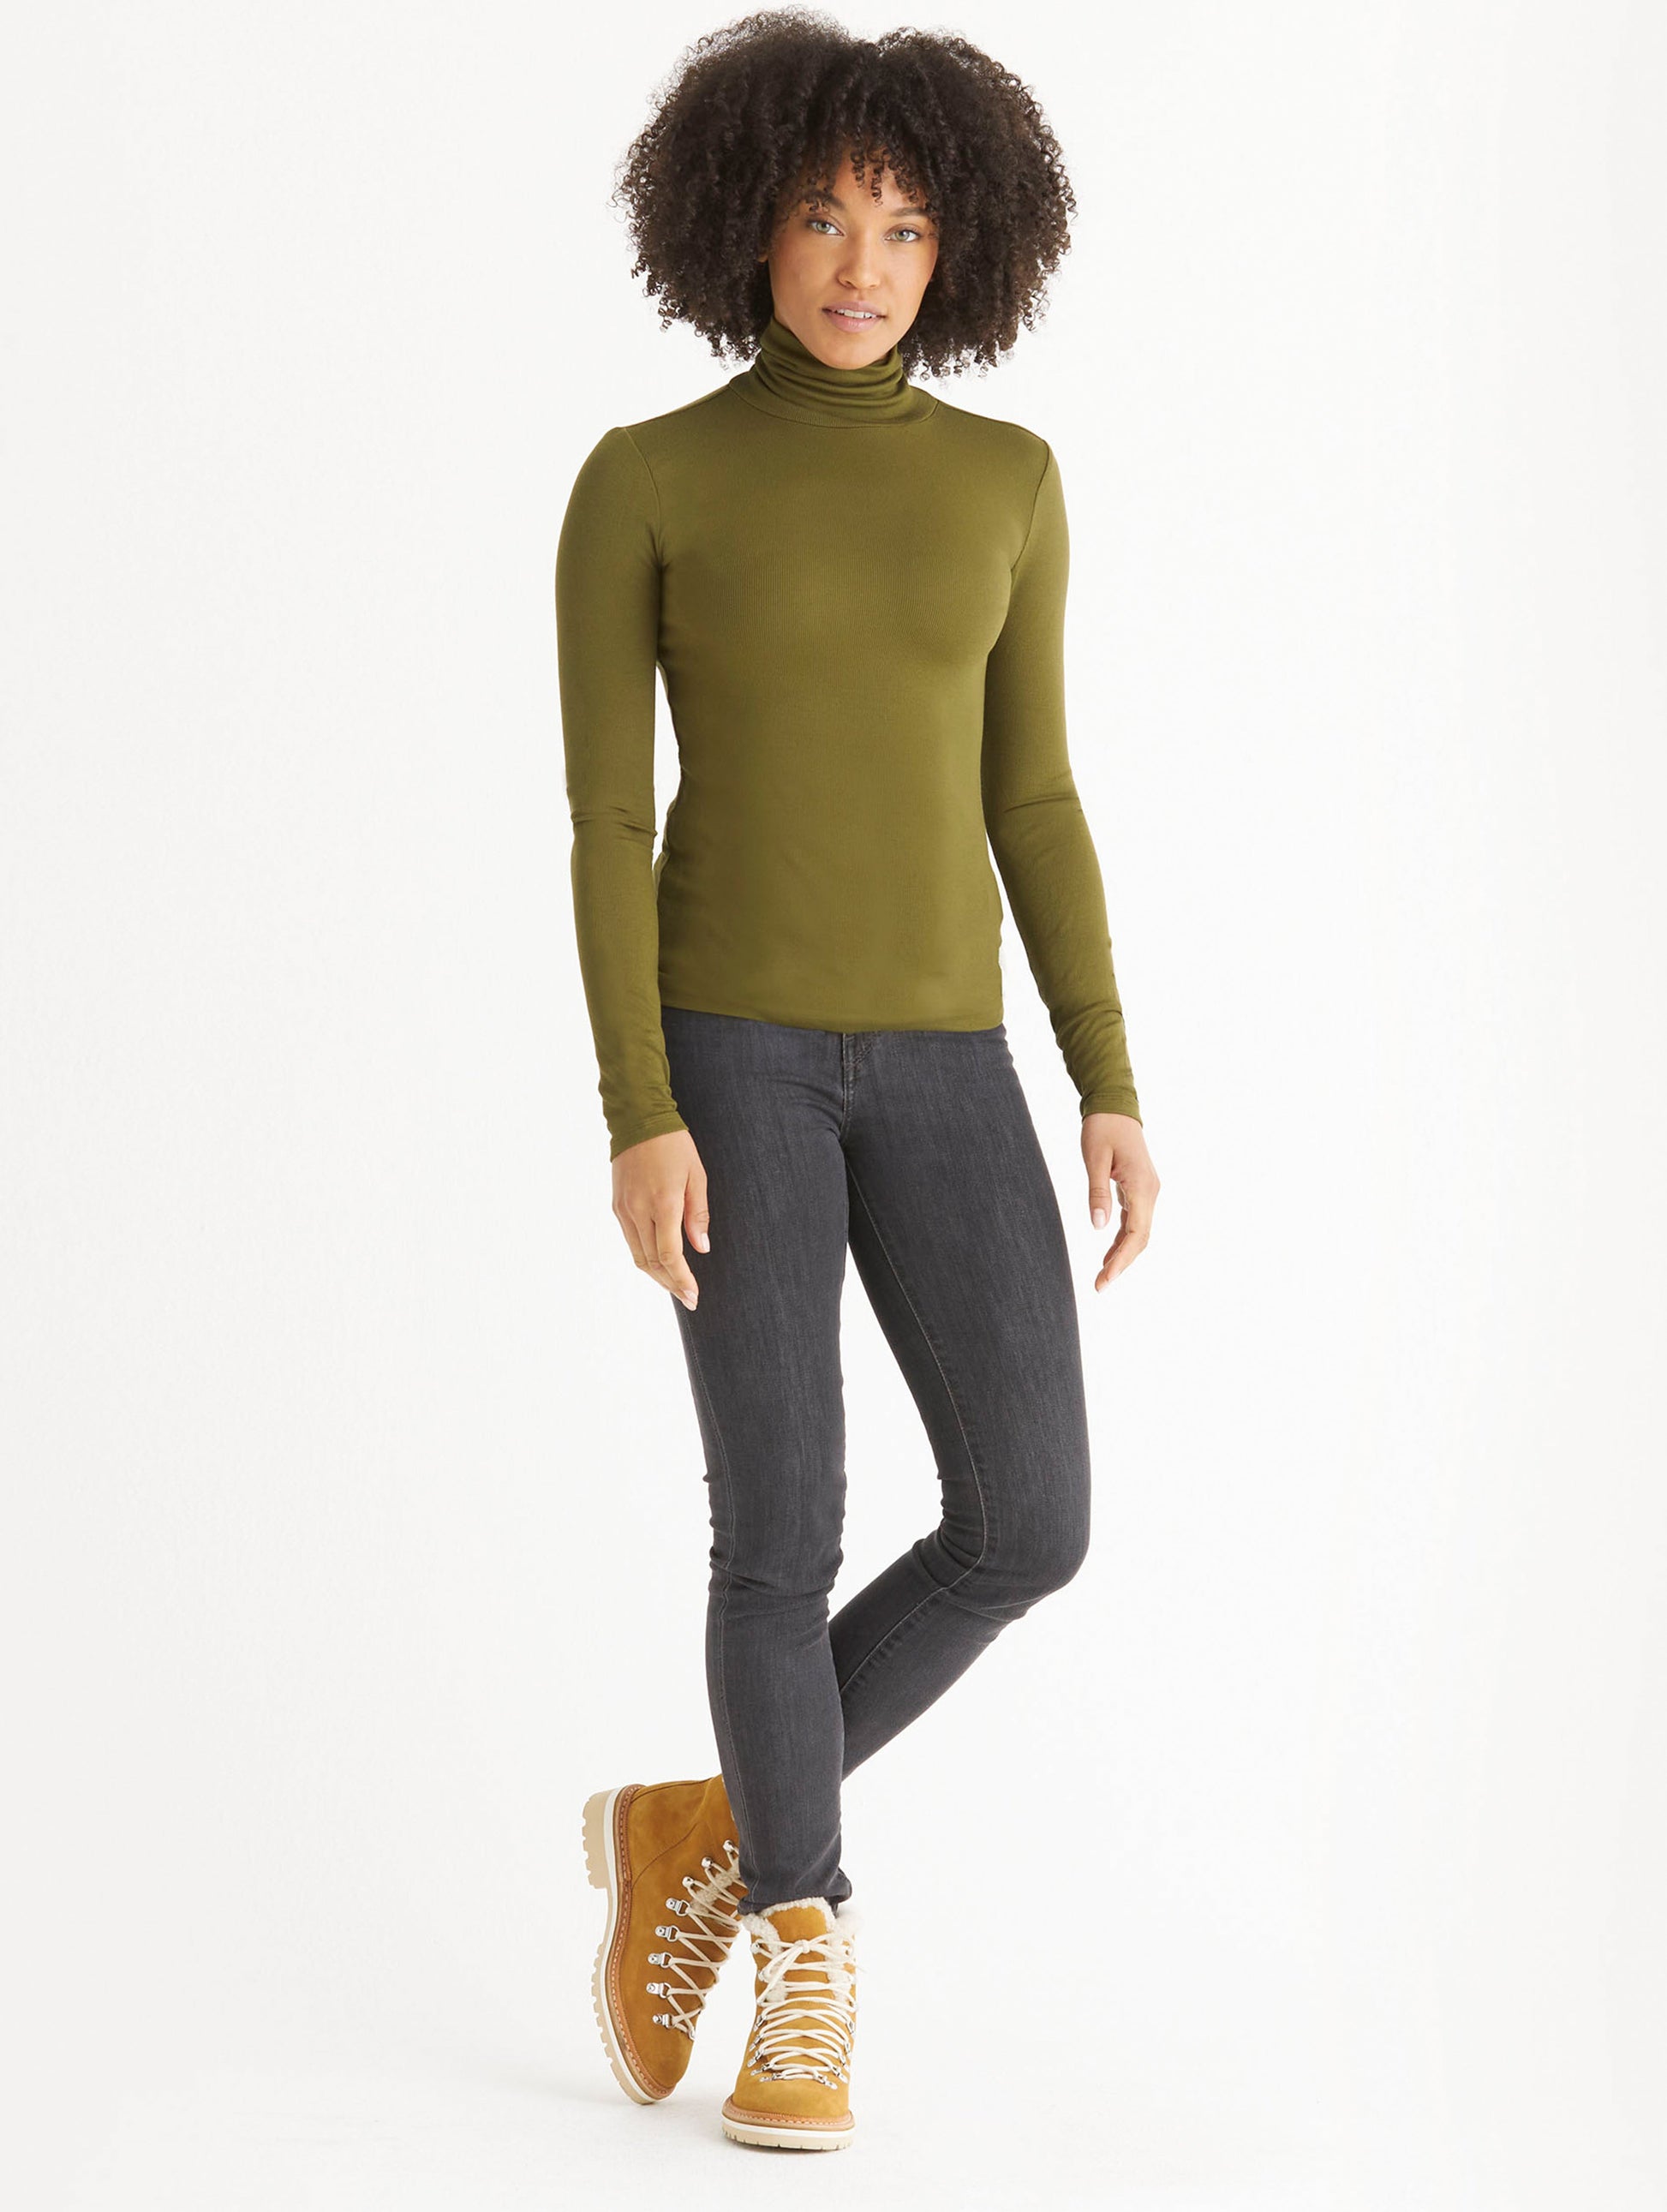 woman wearing green long-sleeve shirt from Aether Apparel